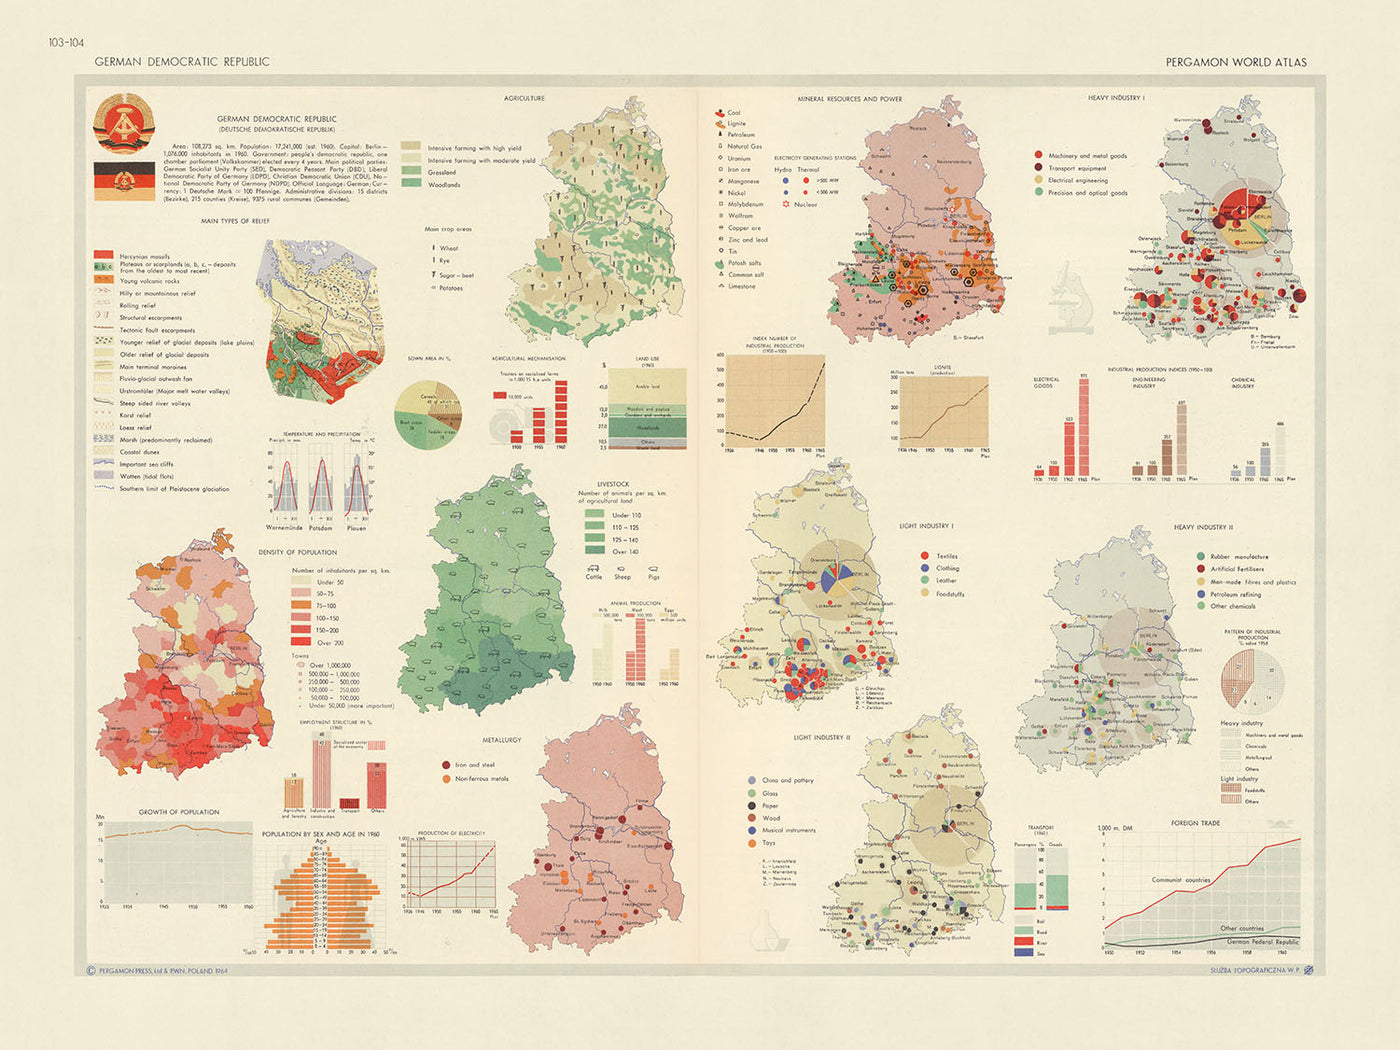 Old Infographic Map of German Democratic Republic, 1967: Population, Industry, Foreign Trade